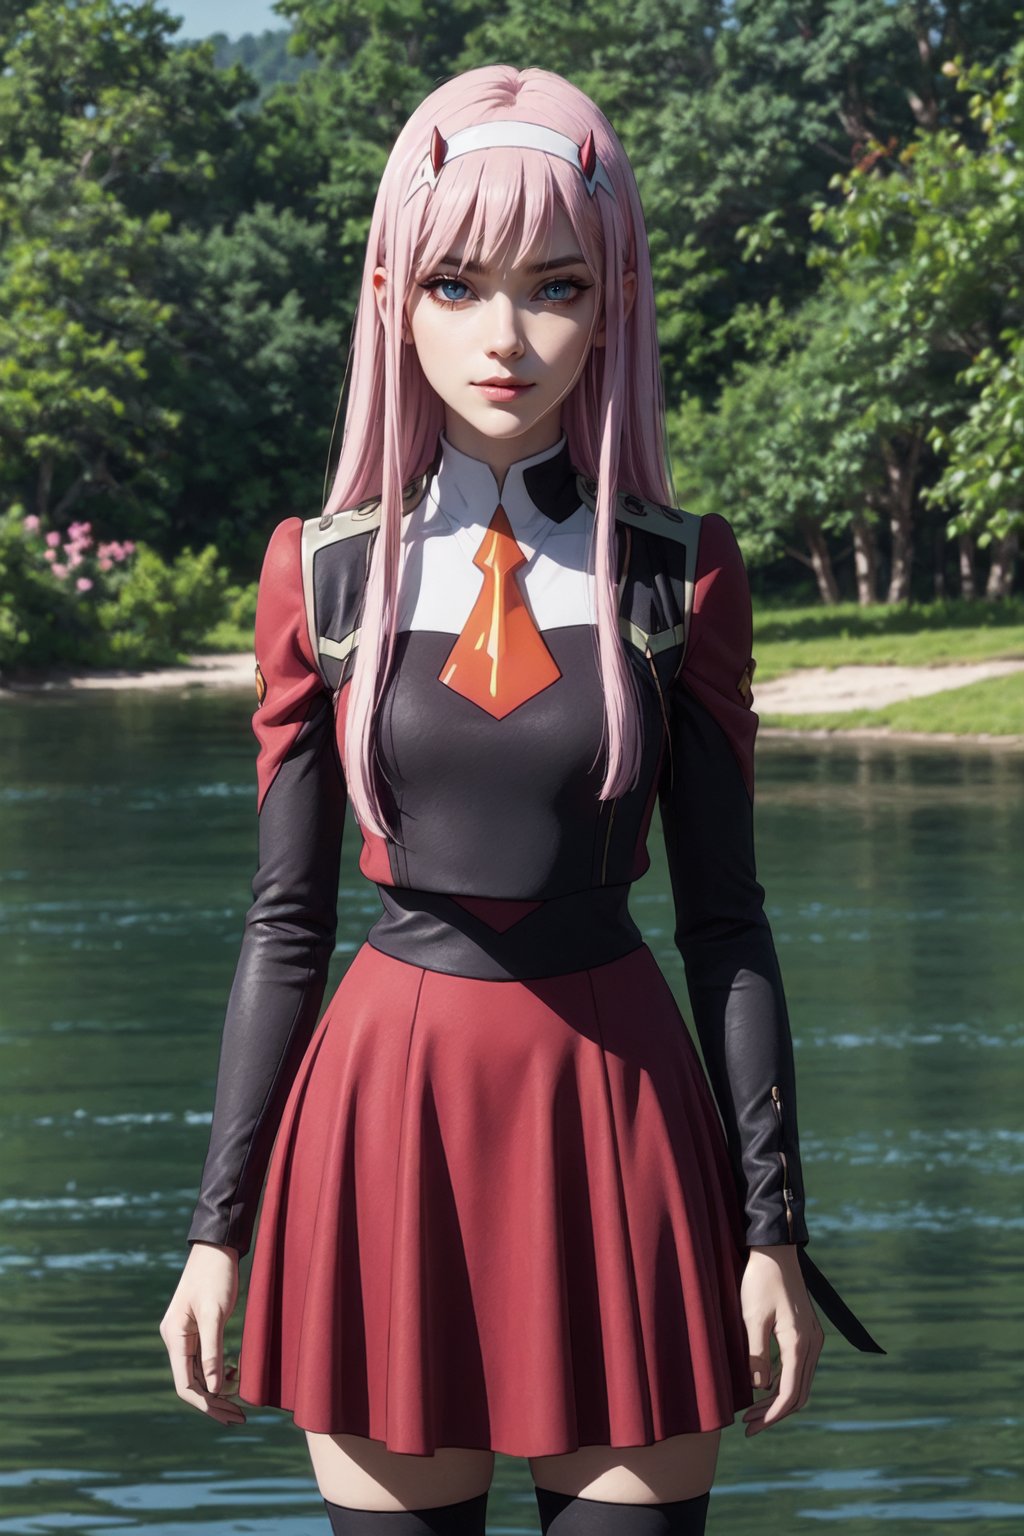 ((alone:1.5)). ((Solo:1.5)), ((MEDIUM FULL SHOT:1.5)),realistic, masterpiece,best quality,High definition, , high resolution,,A 25 years old woman, zero_two, outdoors, SFW, portrait, park,   professional lighting, moon, Pink hair, long hair, looking away, ((shy smile )), medium breats, hourglass body, flowers, lake, raytracing, short skirt